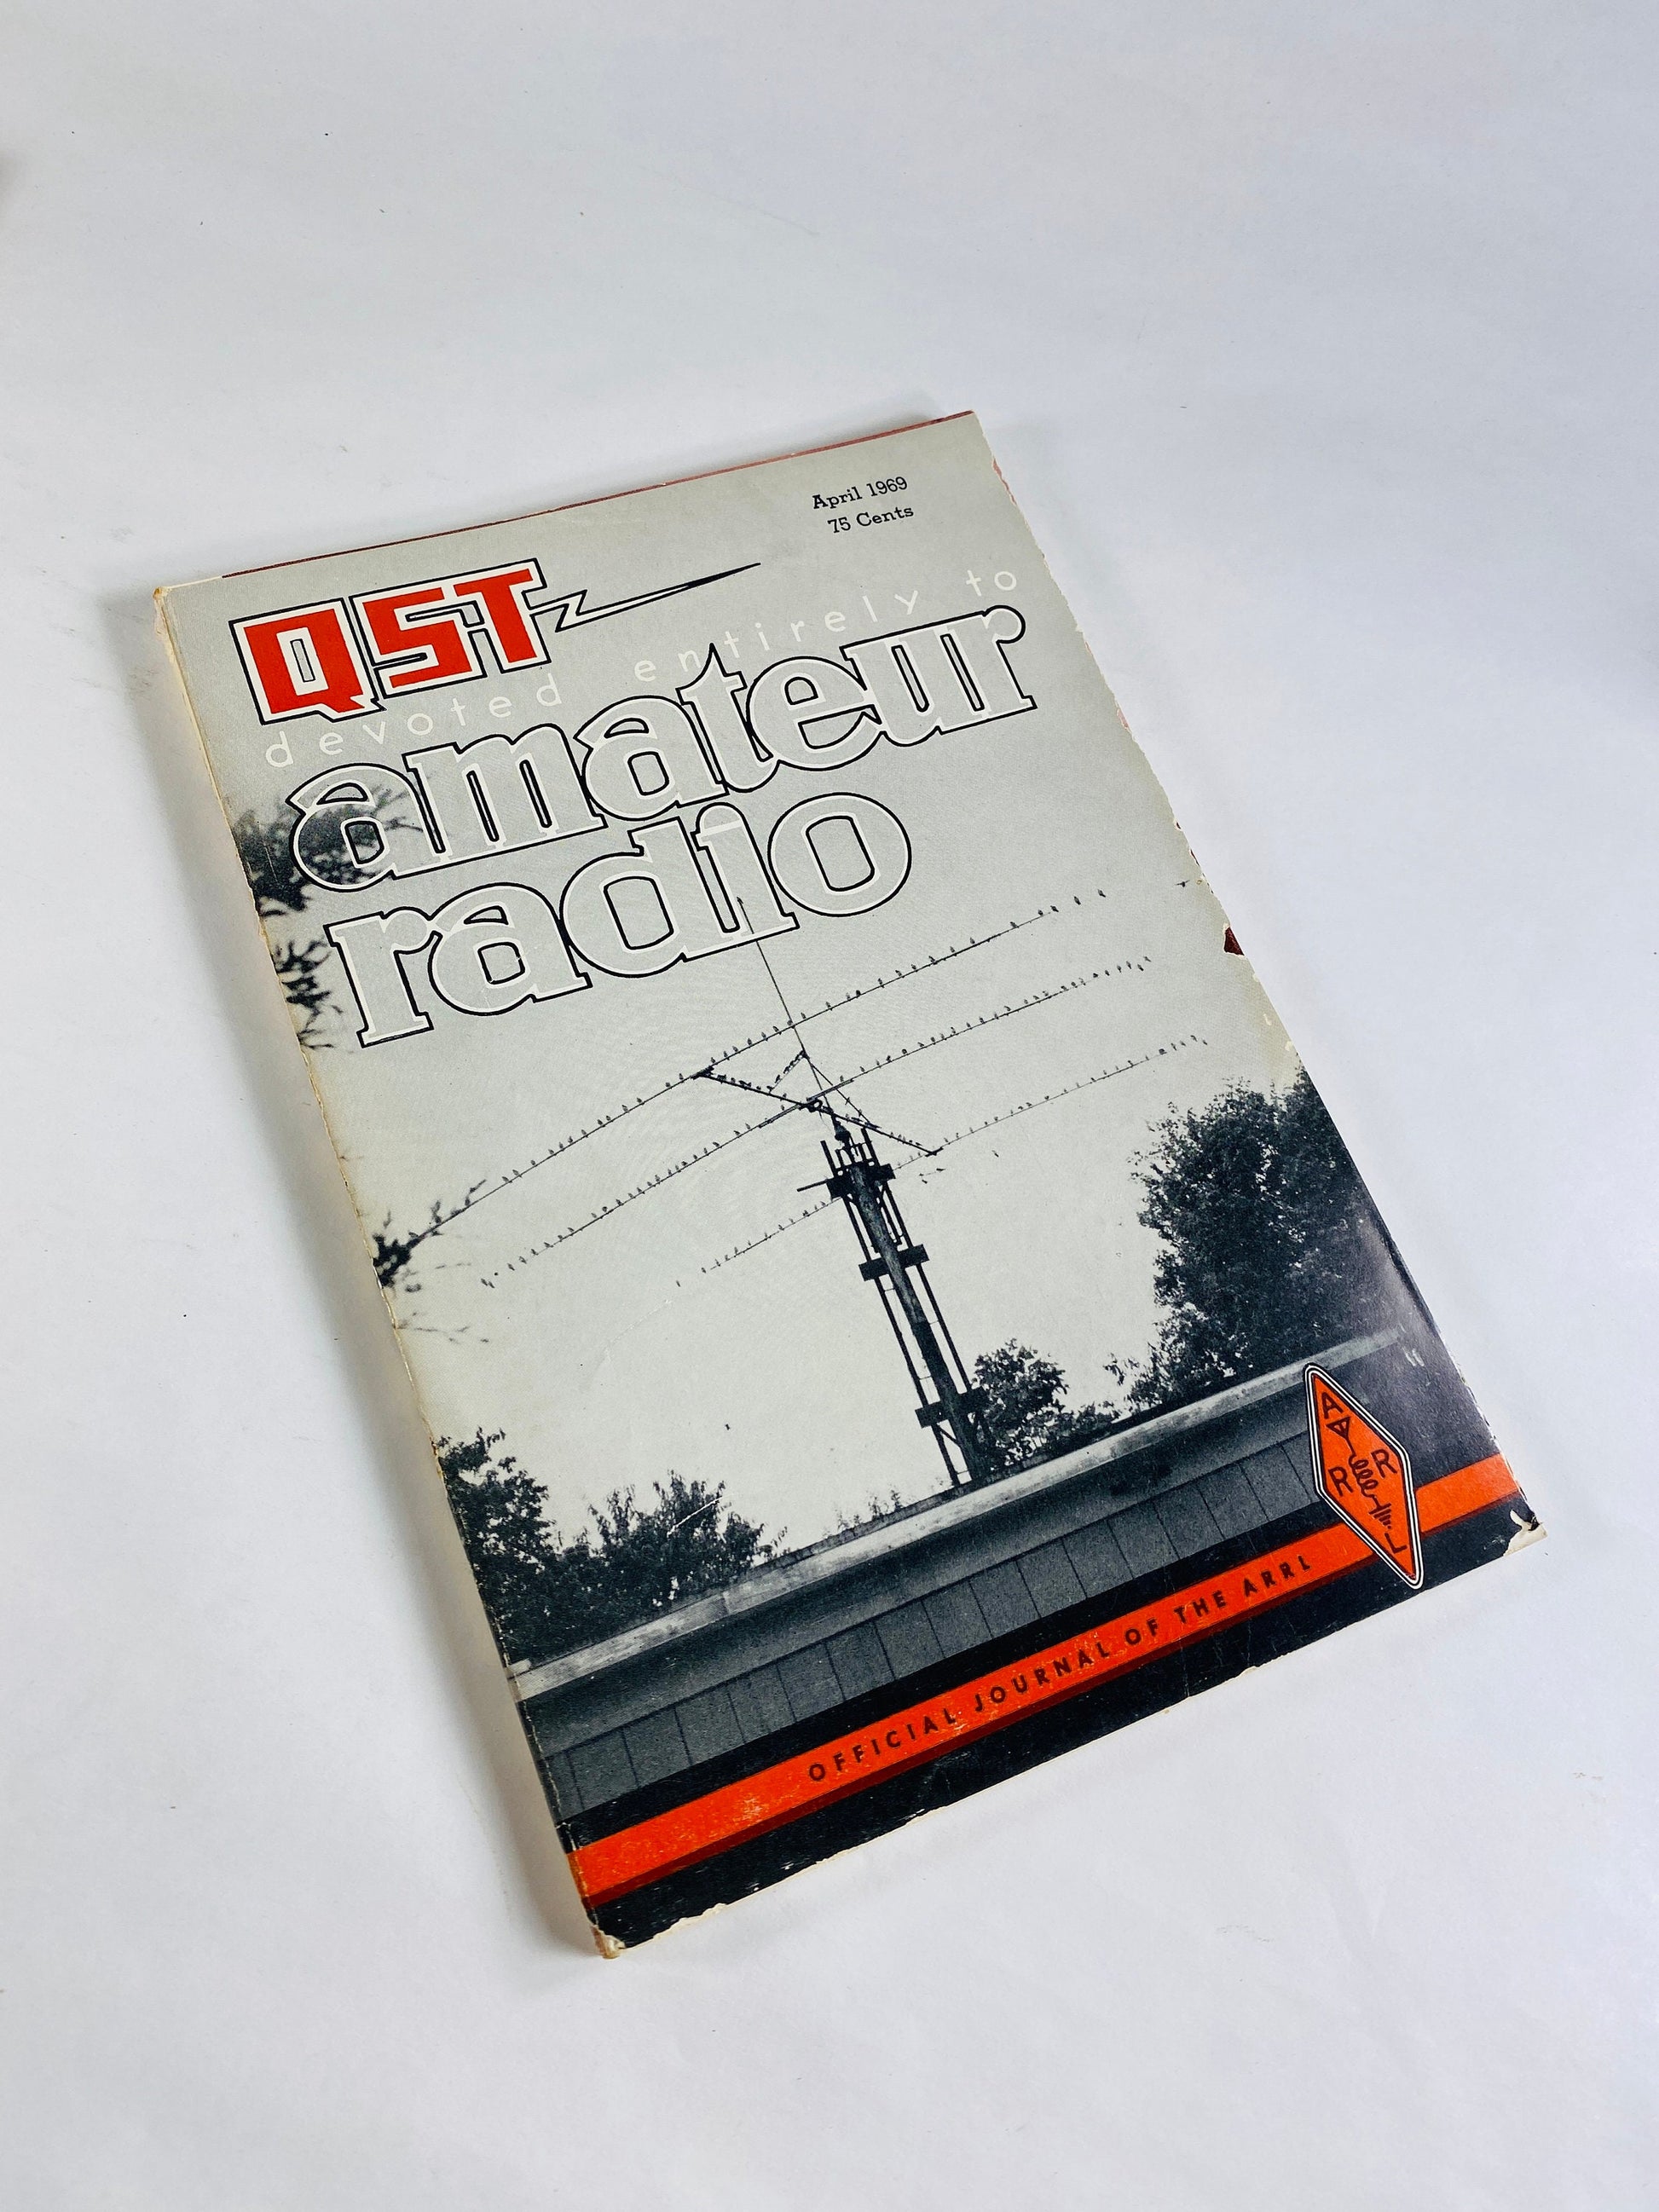 1969 QST AARL Radio vintage magazine Operator's Guide Amateur license. Electronic engineer gift communications